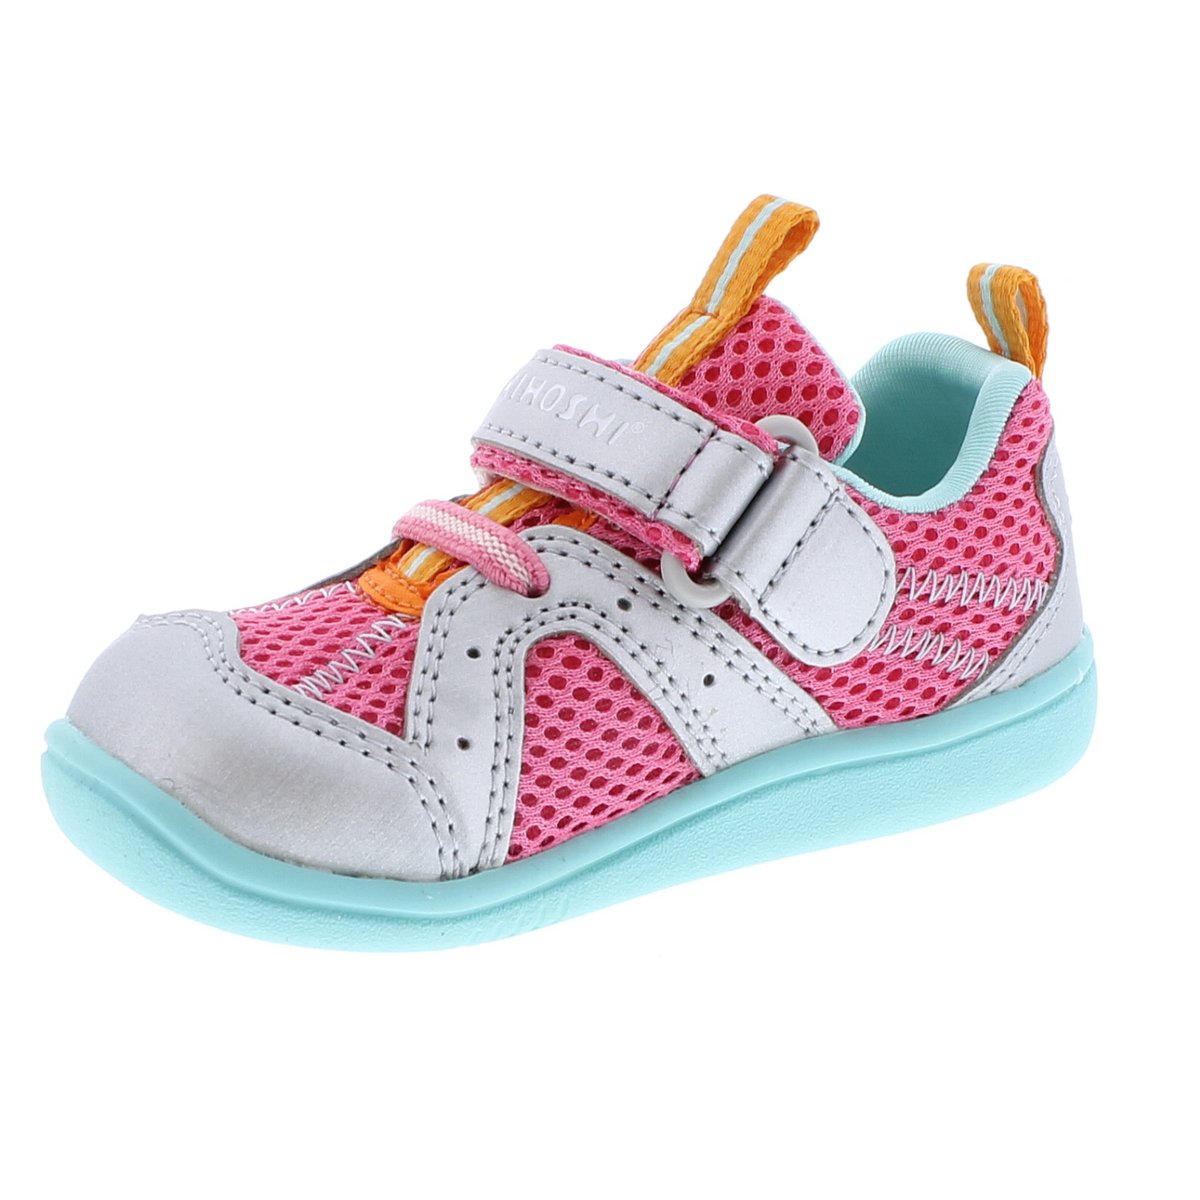 Baby Tsukihoshi Marina Sneaker in Lavender/Navy from the front view